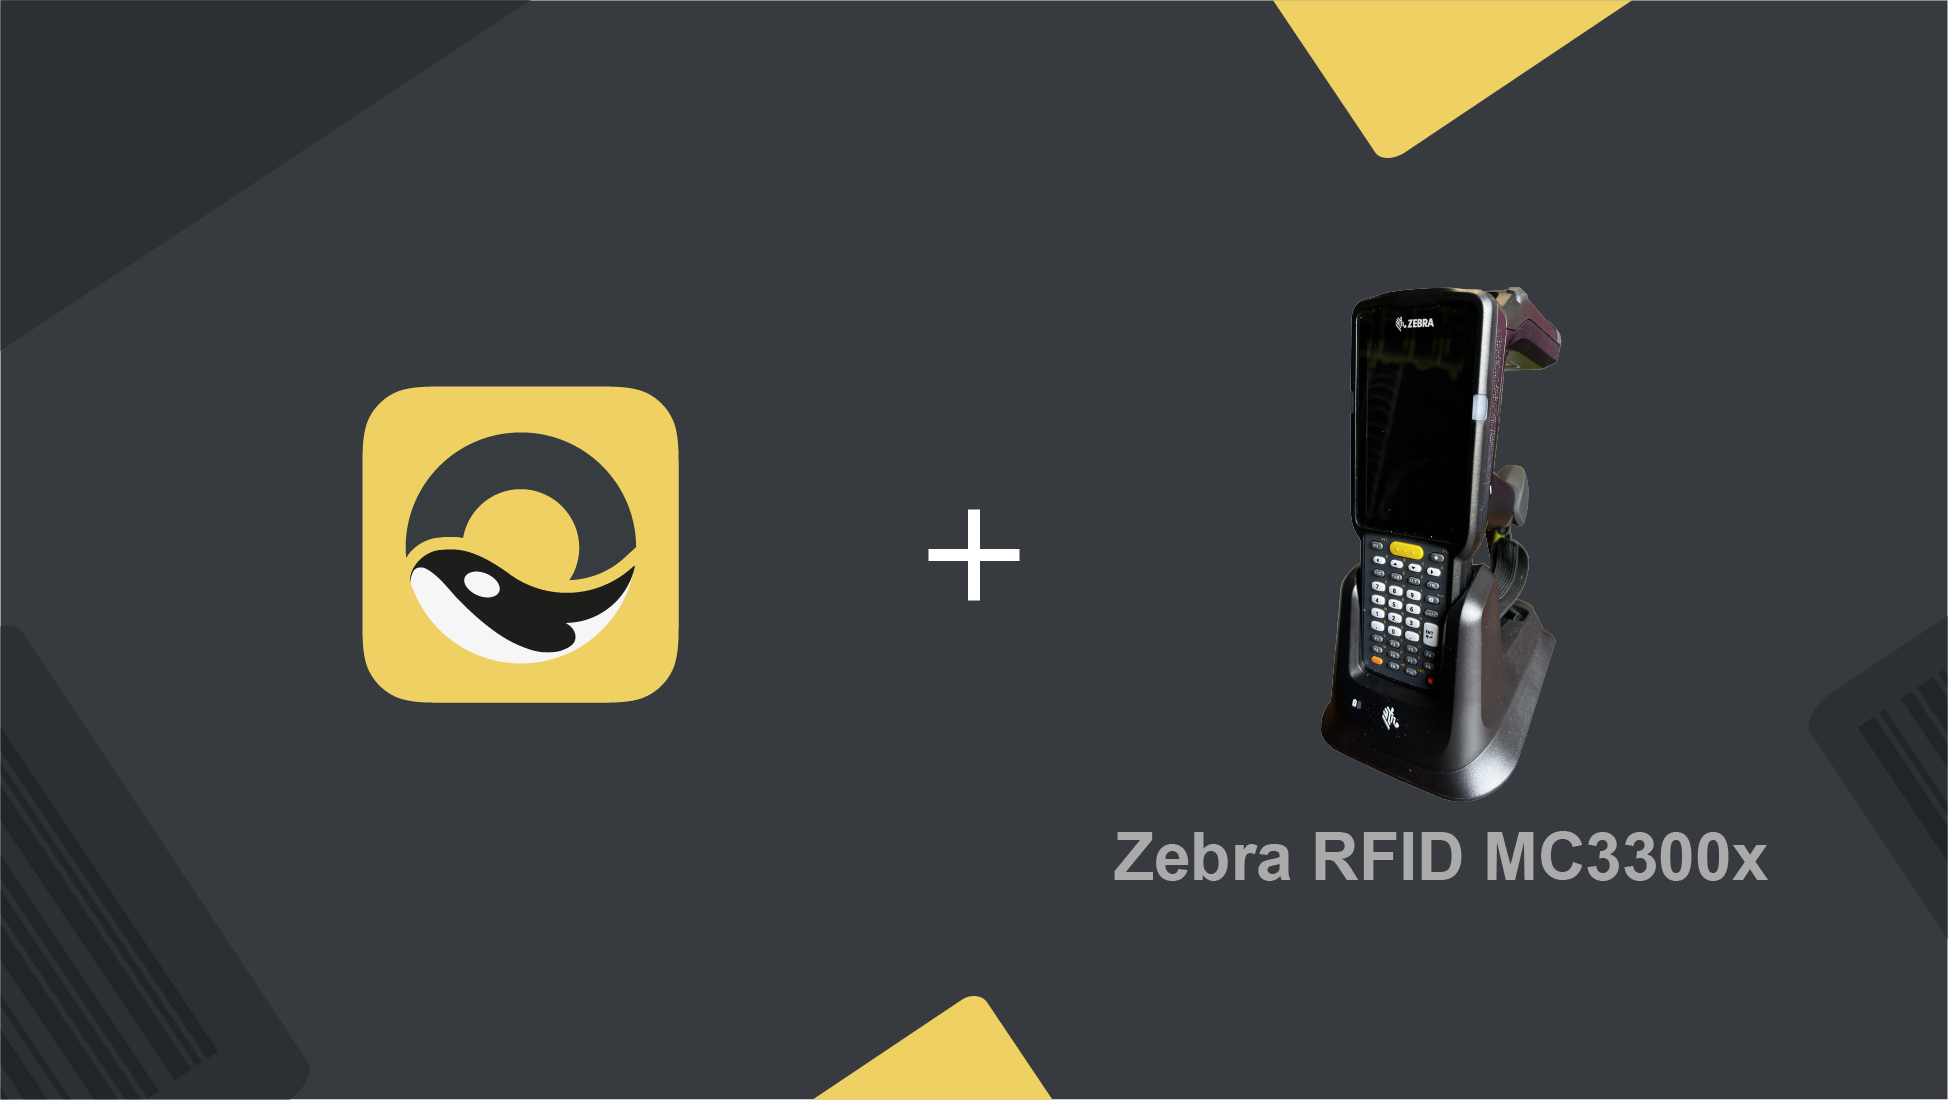 How to use the Zebra MC3300x RFID scanner with Orca Scan